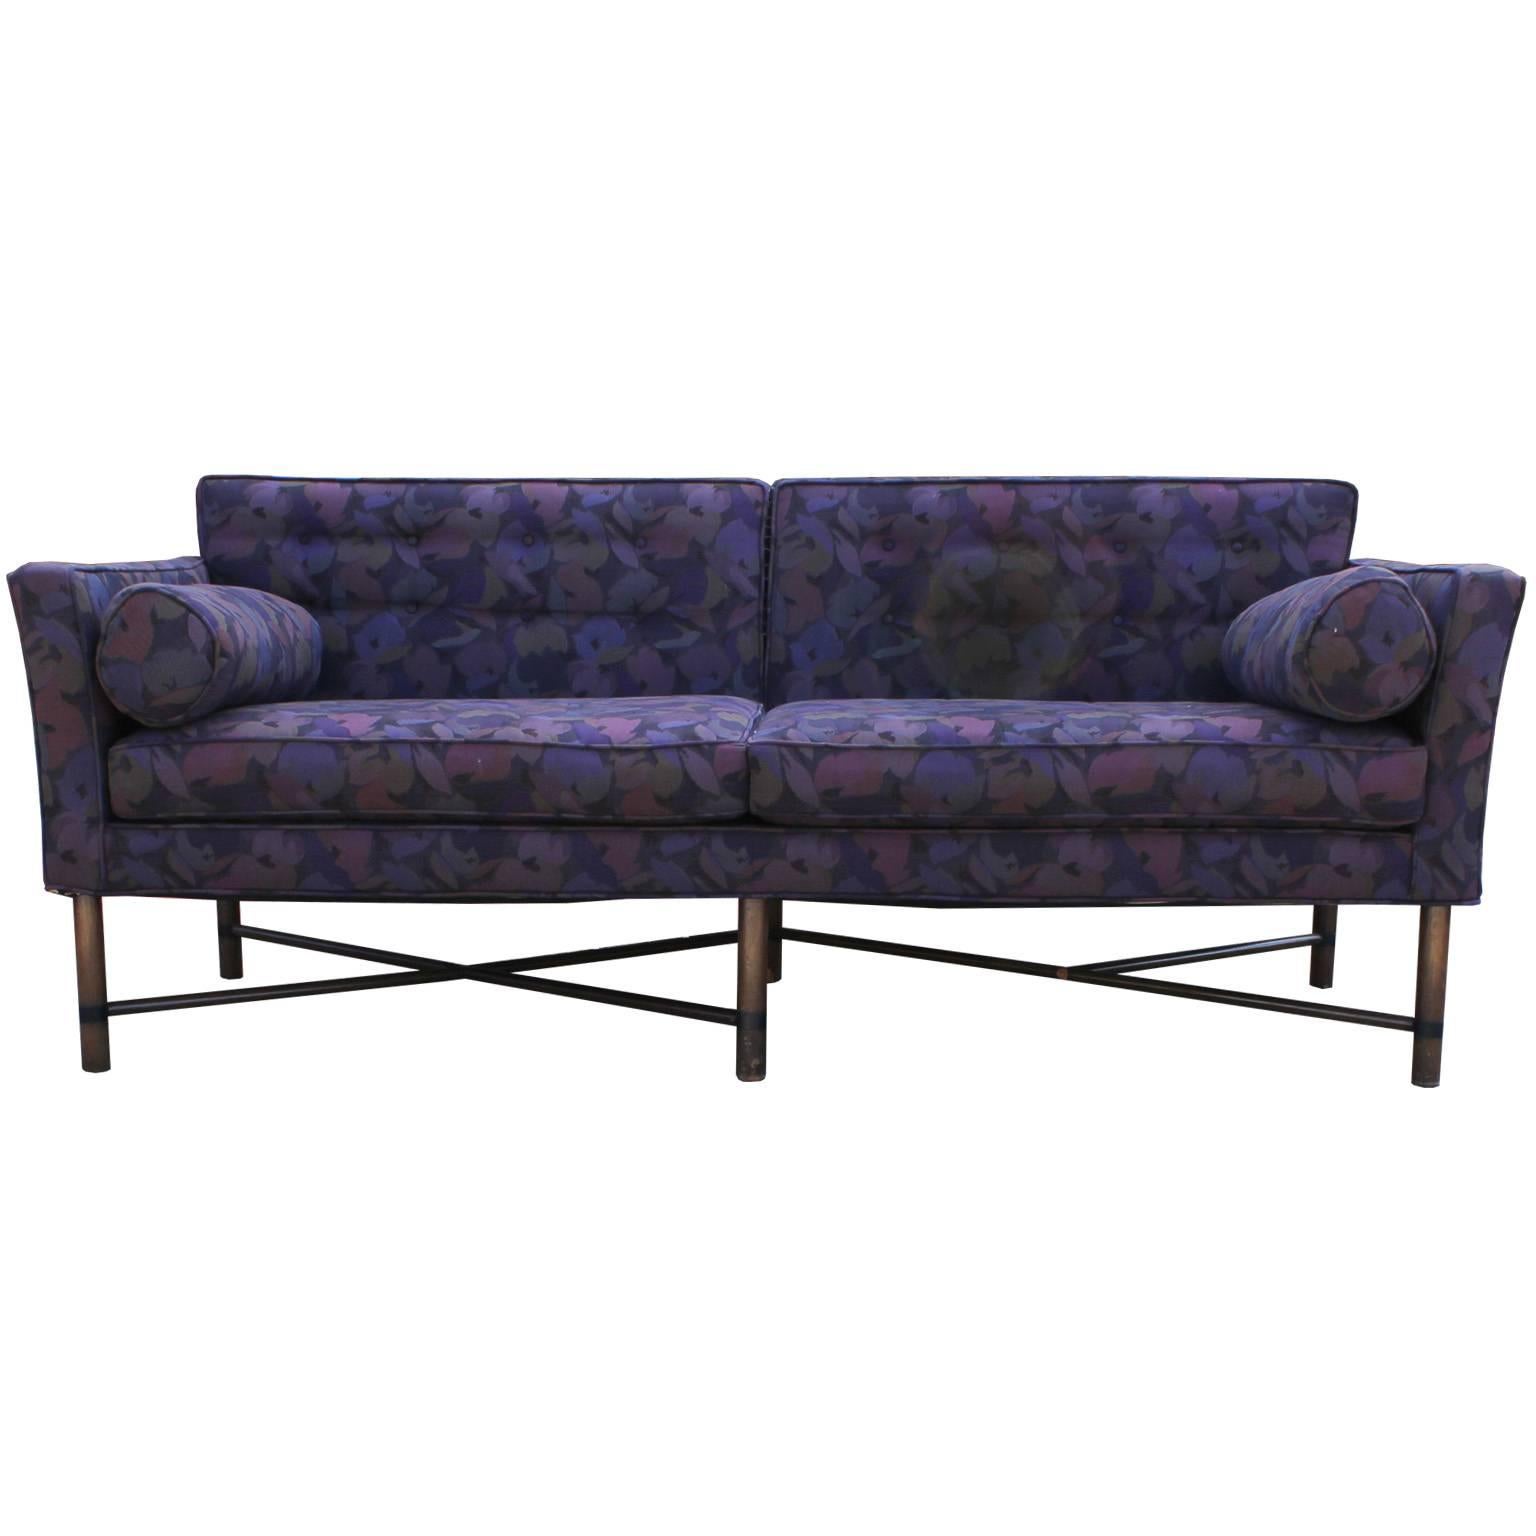 Mid-20th Century Harvey Probber Seating Group Vintage Modern Sofa and Loveseat in Purple Floral